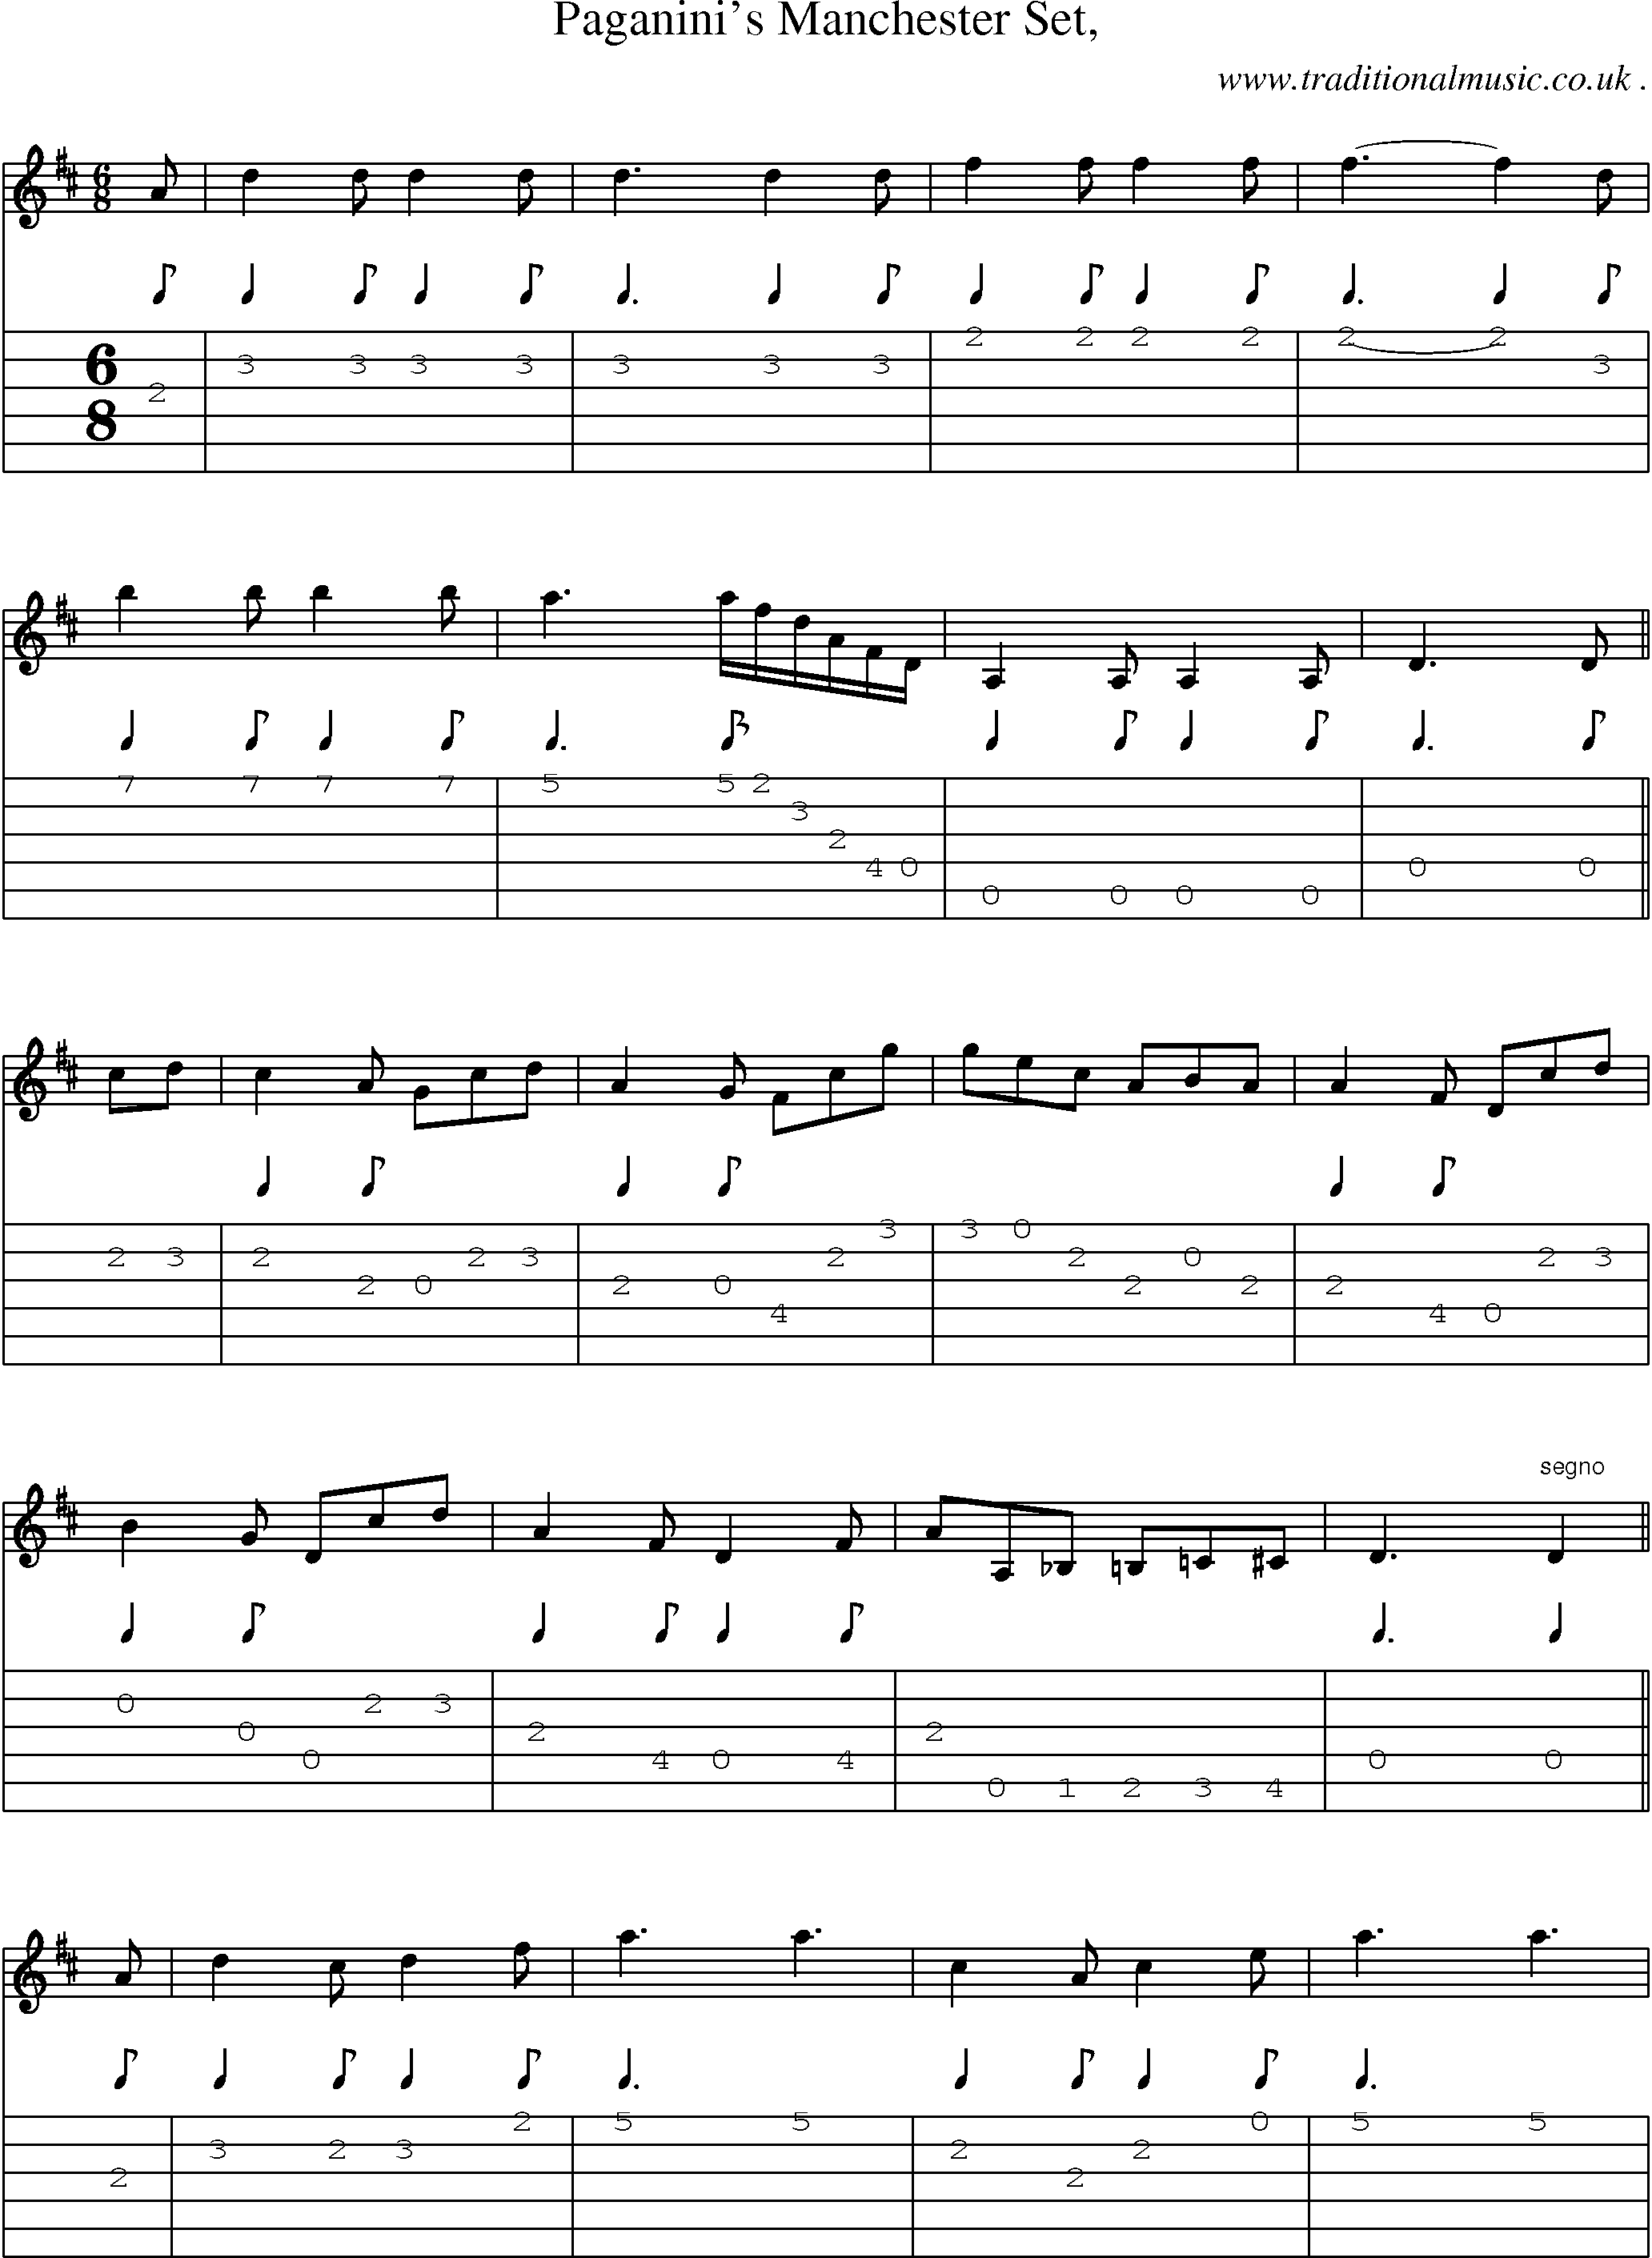 Sheet-Music and Guitar Tabs for Paganinis Manchester Set